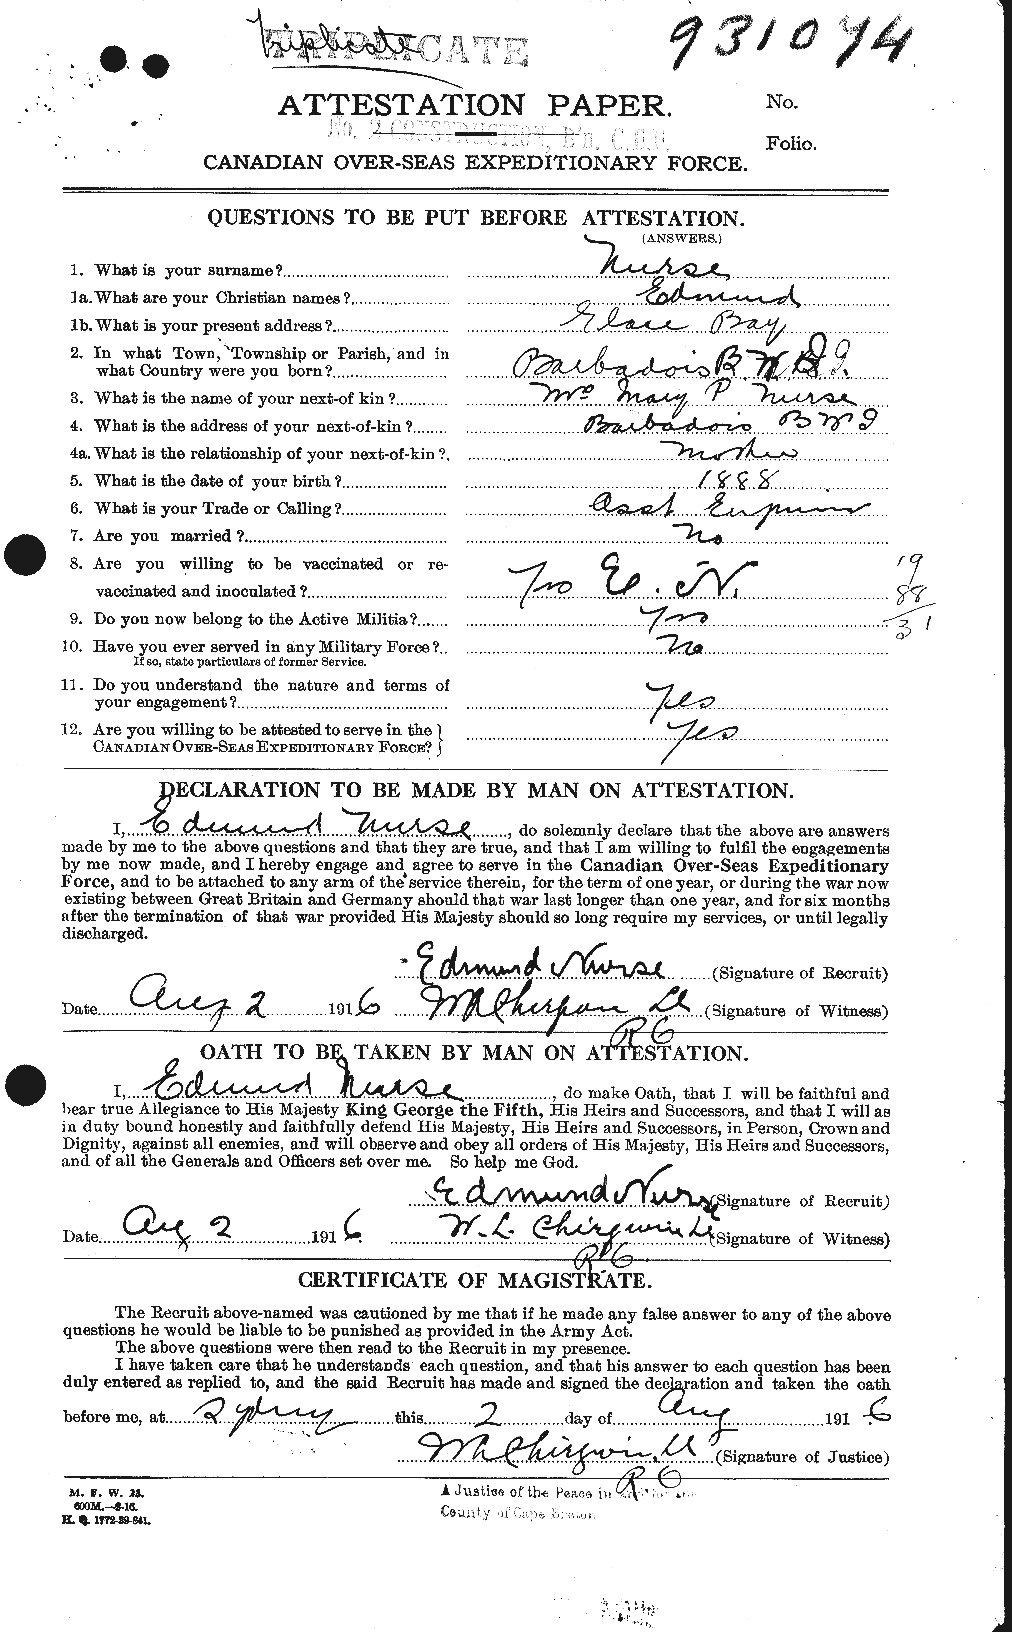 Personnel Records of the First World War - CEF 553362a